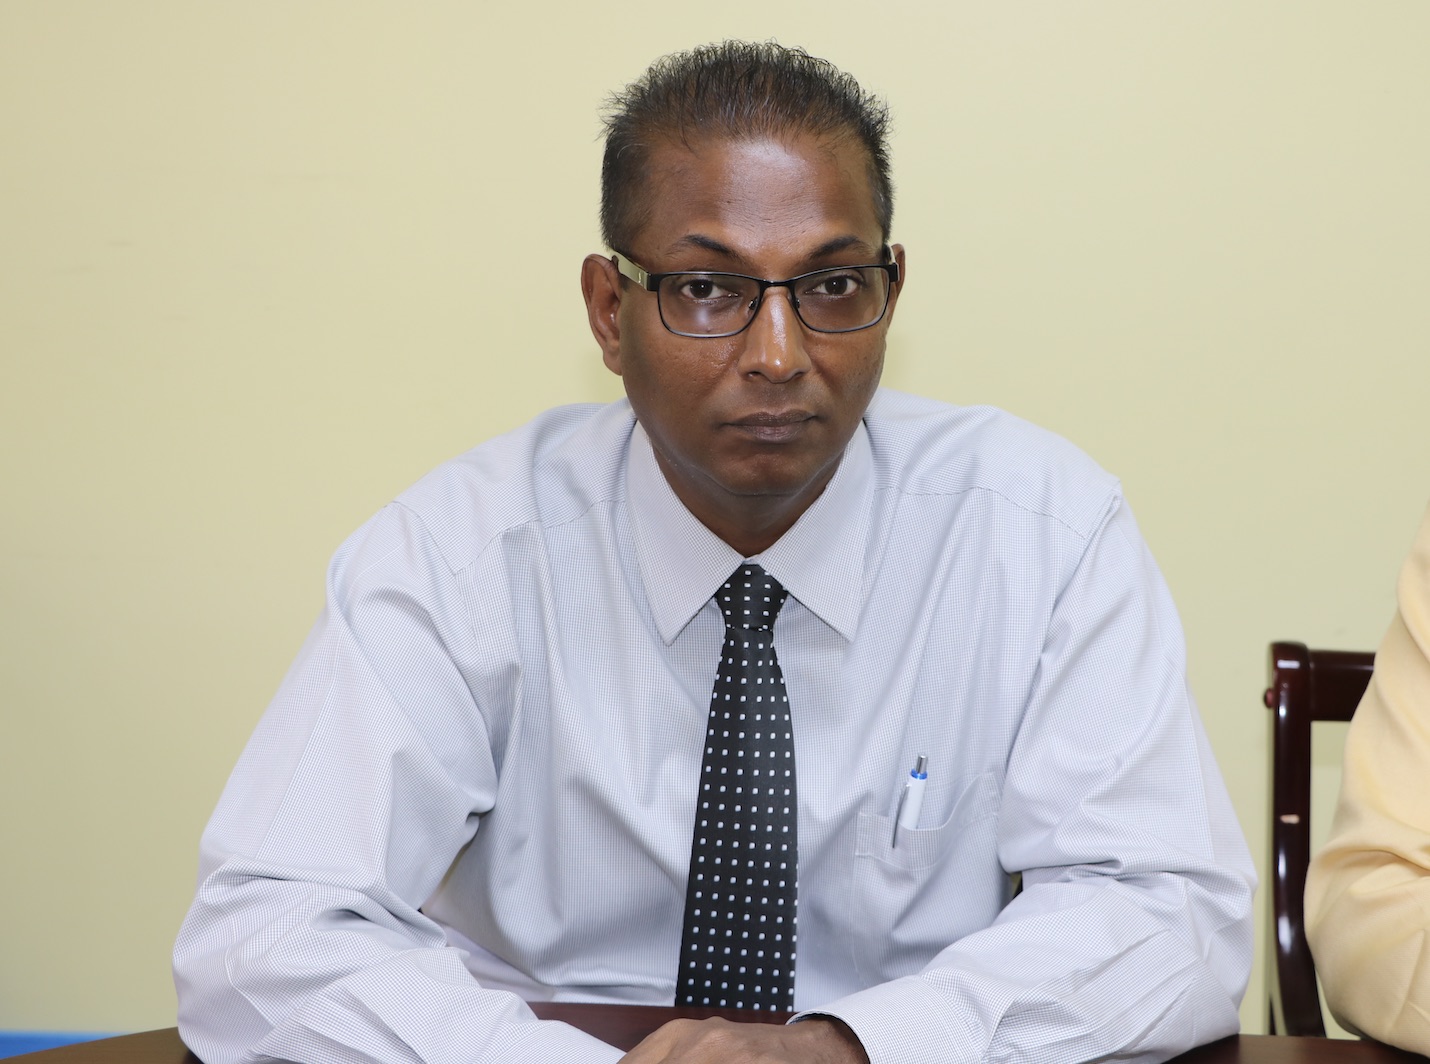 Mr. Gilroy Pultie, General Manager of the Nevis Electricity Company Limited (file photo)